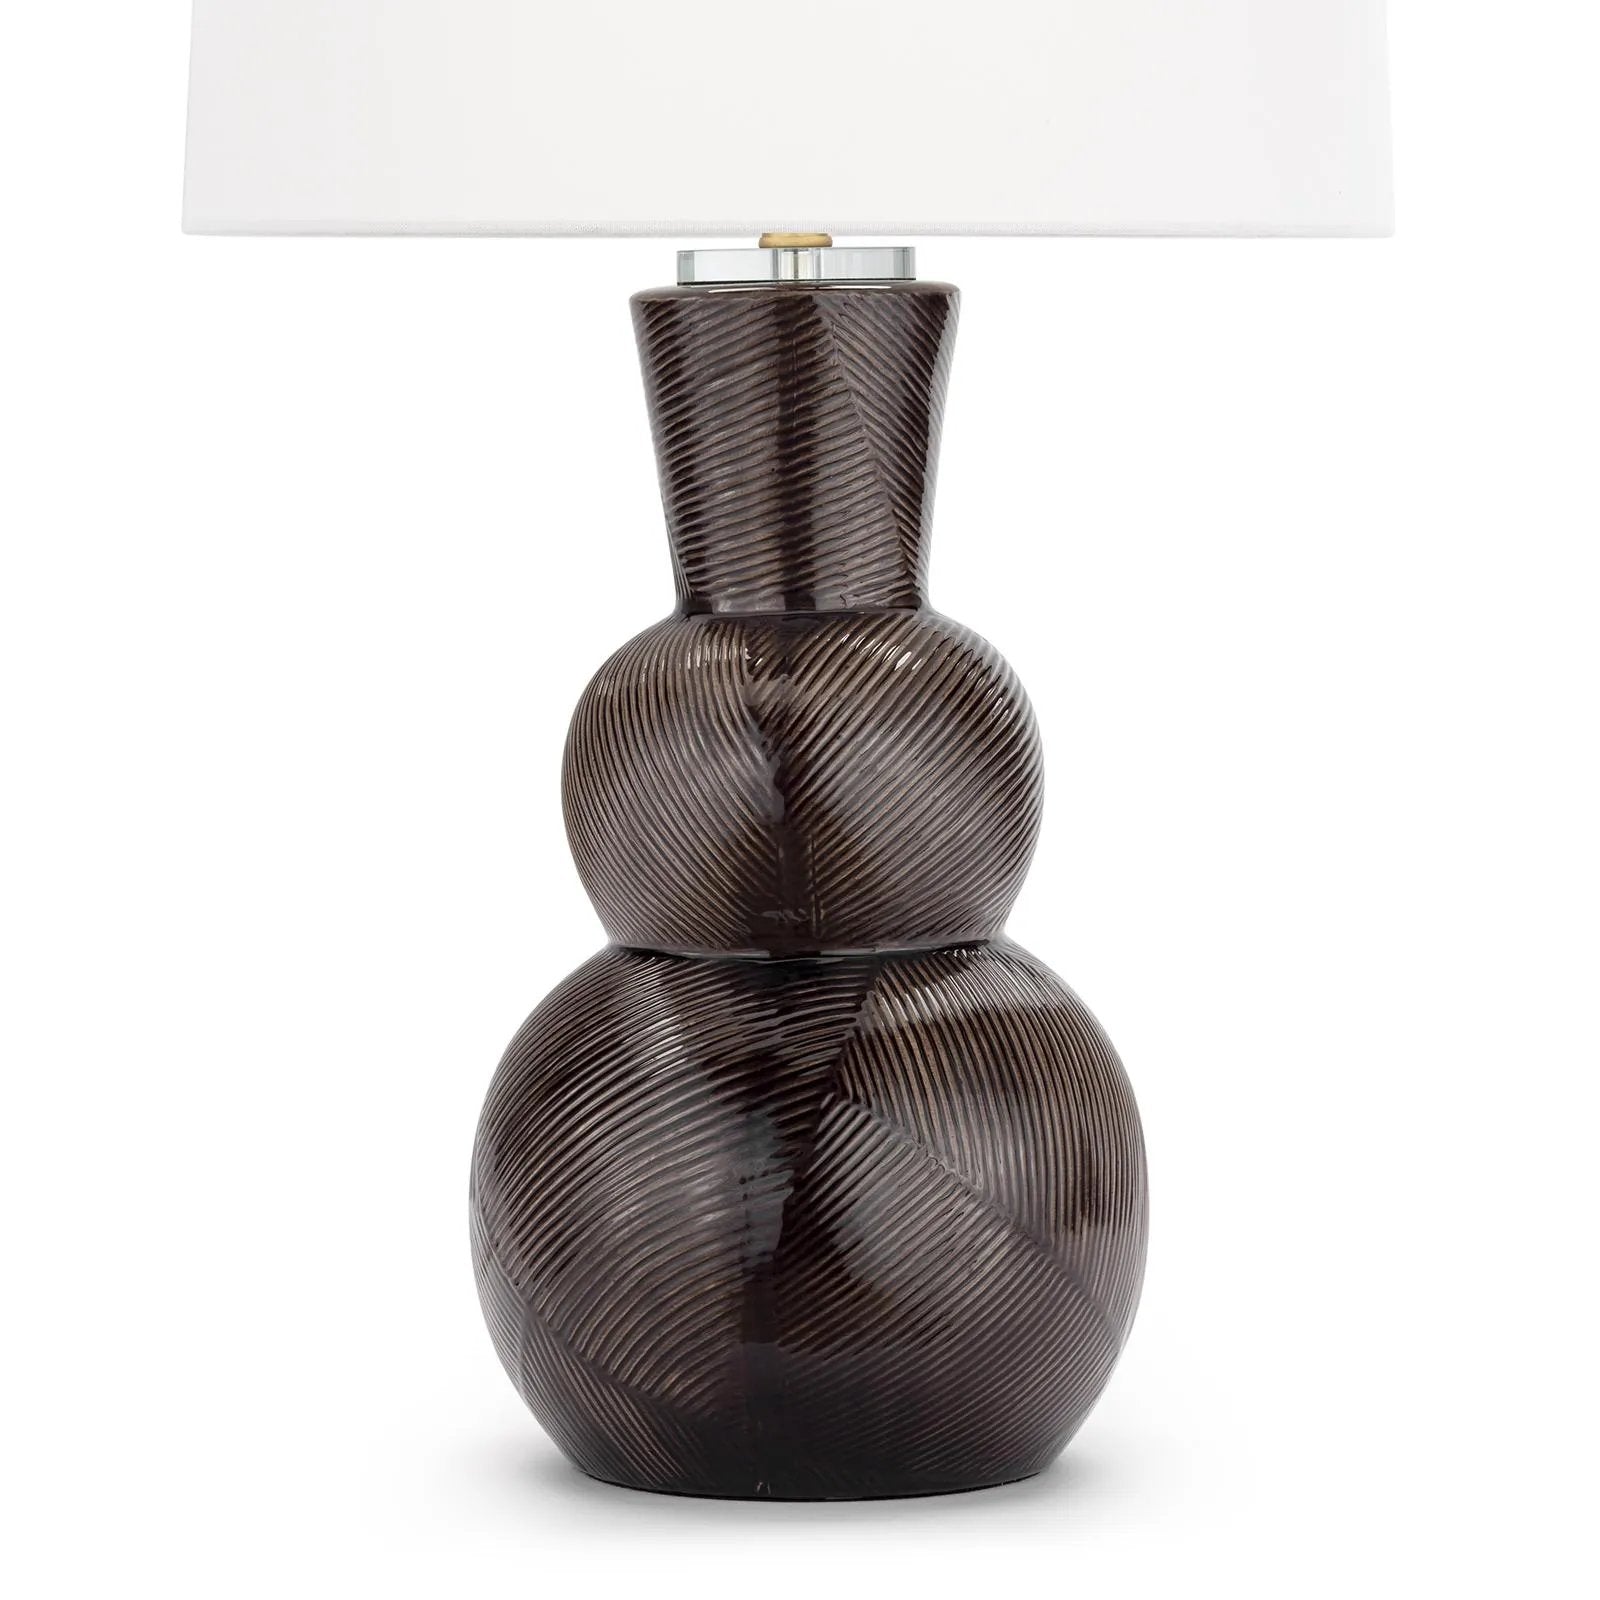 With its alluring silhouette, the Hugo ceramic table lamp brings contemporary appeal and modern contrast to interiors. Employing a specialized glazing technique, master artisans hand-shape earthenware to produce a luxurious finish for subtle highs and lows that shift with the light source above. Amethyst Home provides interior design, new home construction design consulting, vintage area rugs, and lighting in the Omaha metro area.